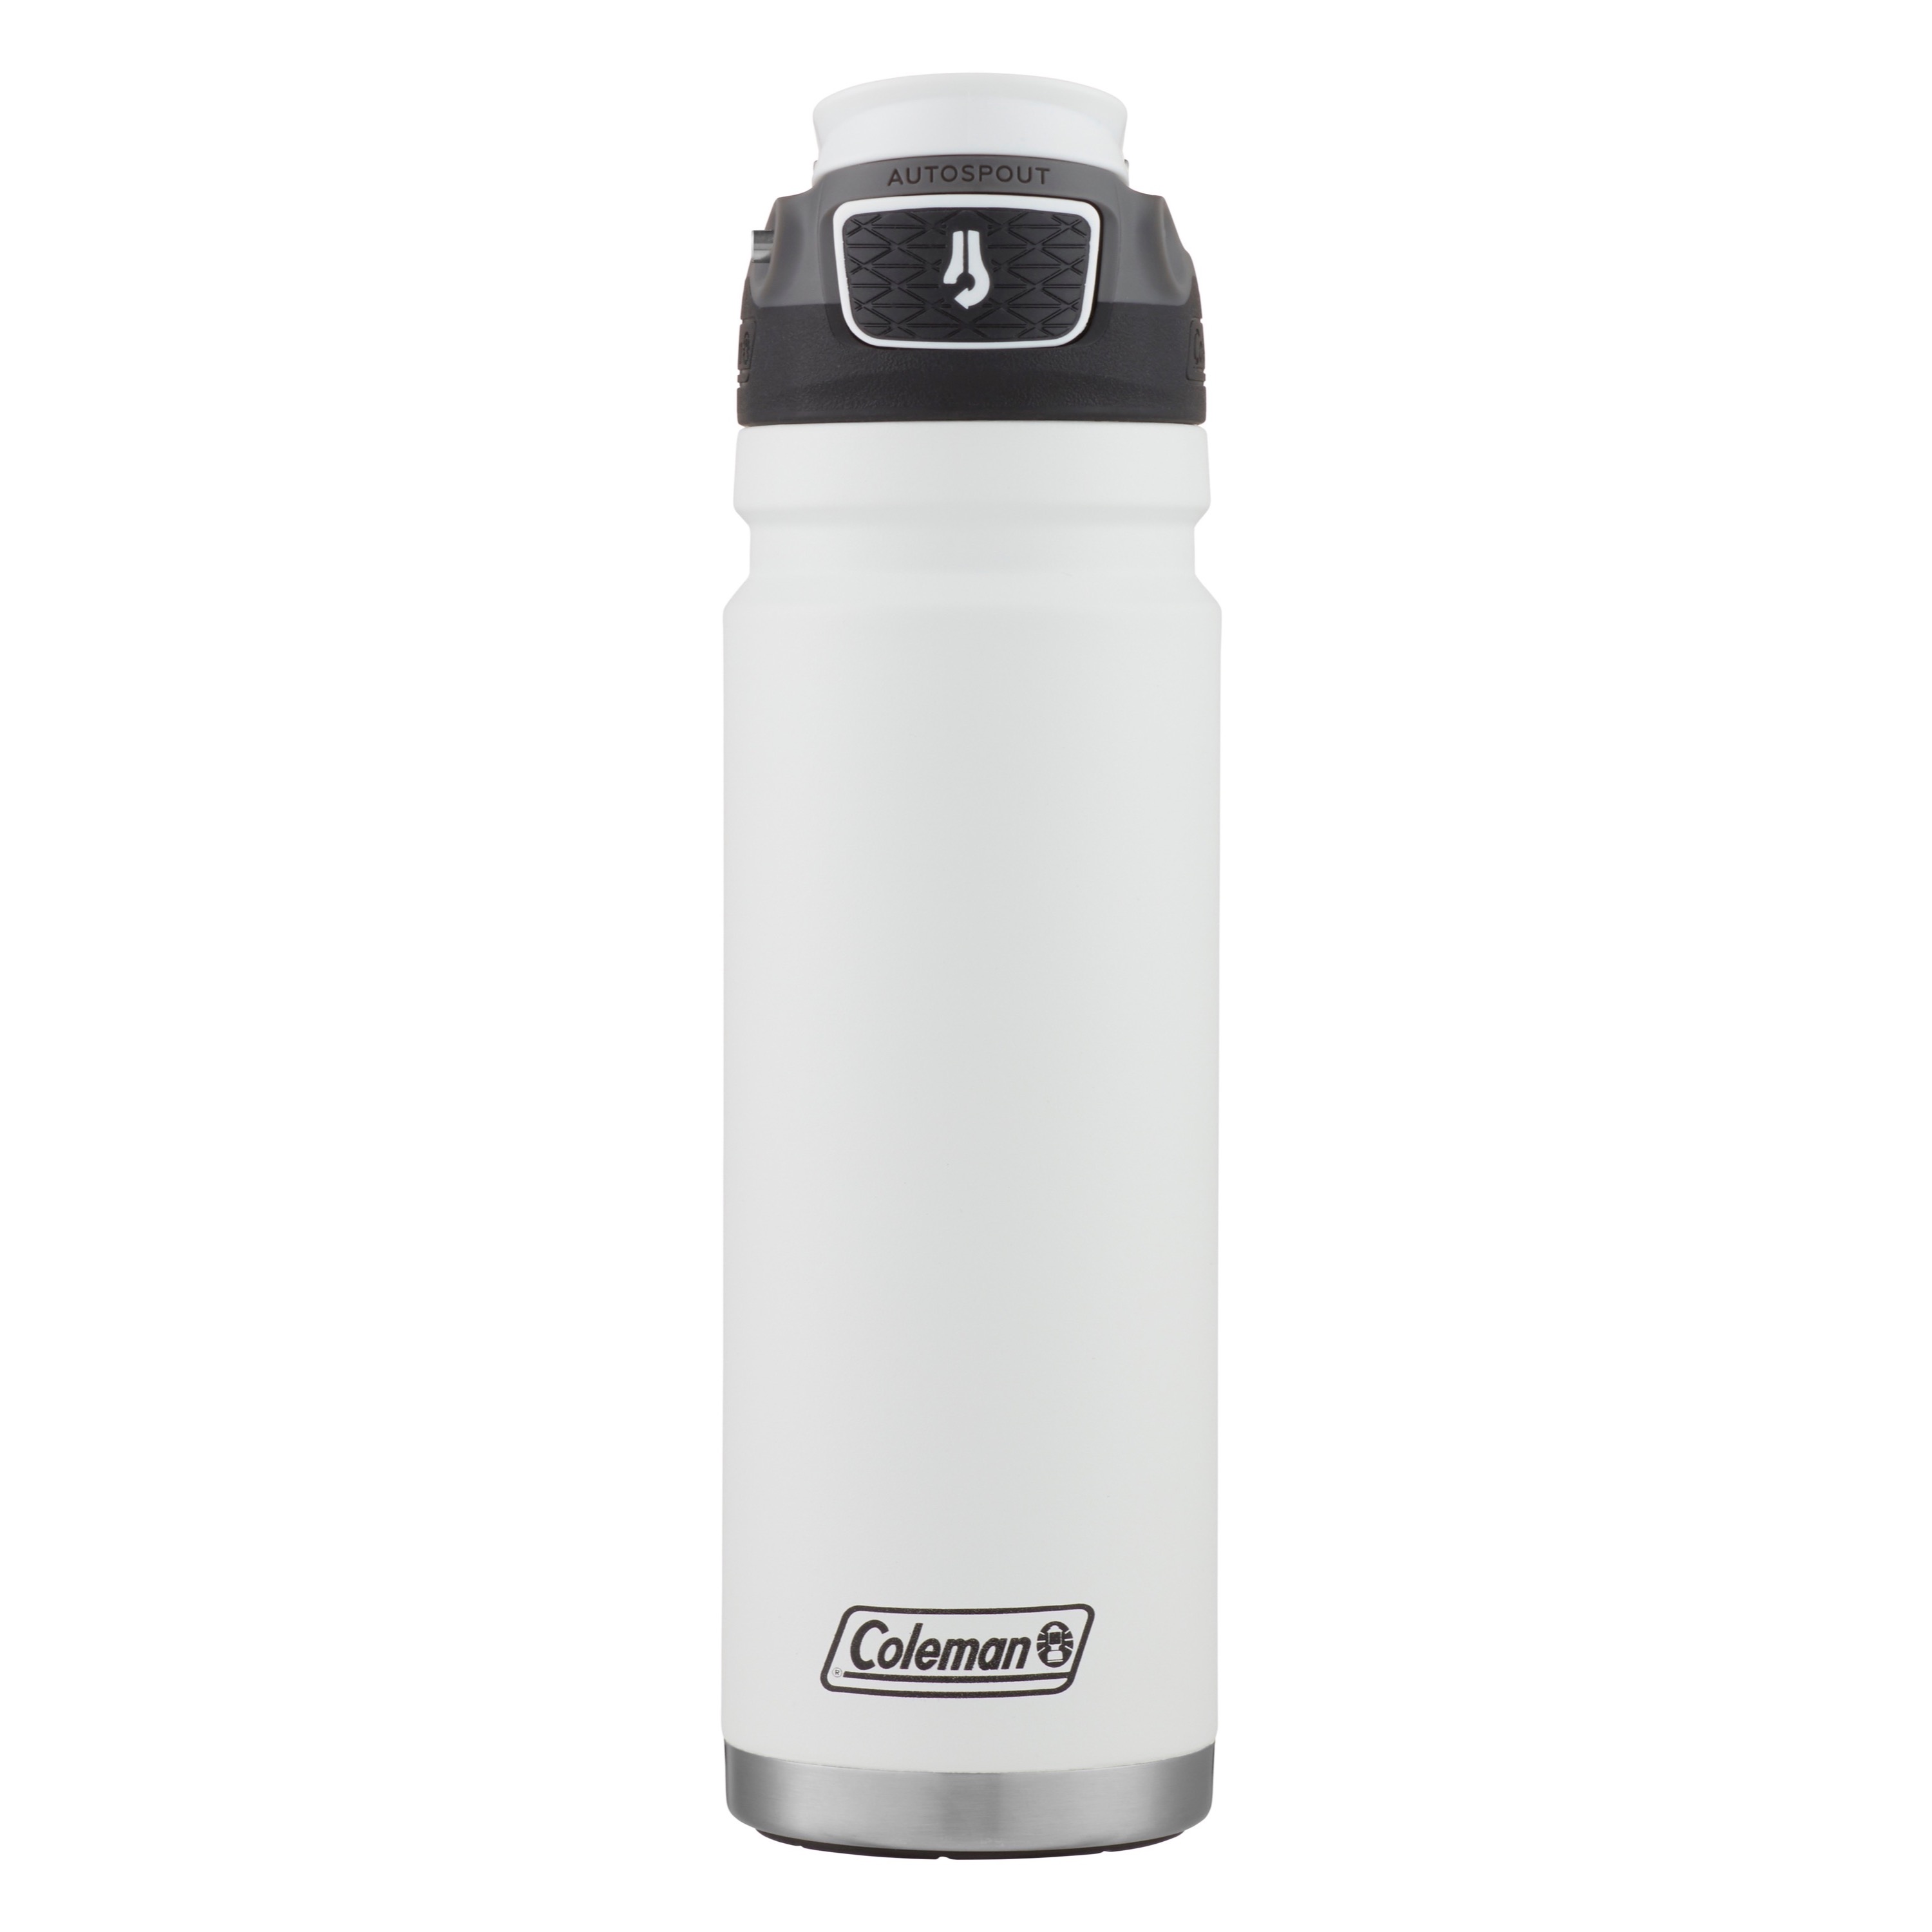 Coleman Switch Autospout Stainless Steel Insulated Water Bottle, 24 oz., White Cloud - image 1 of 9